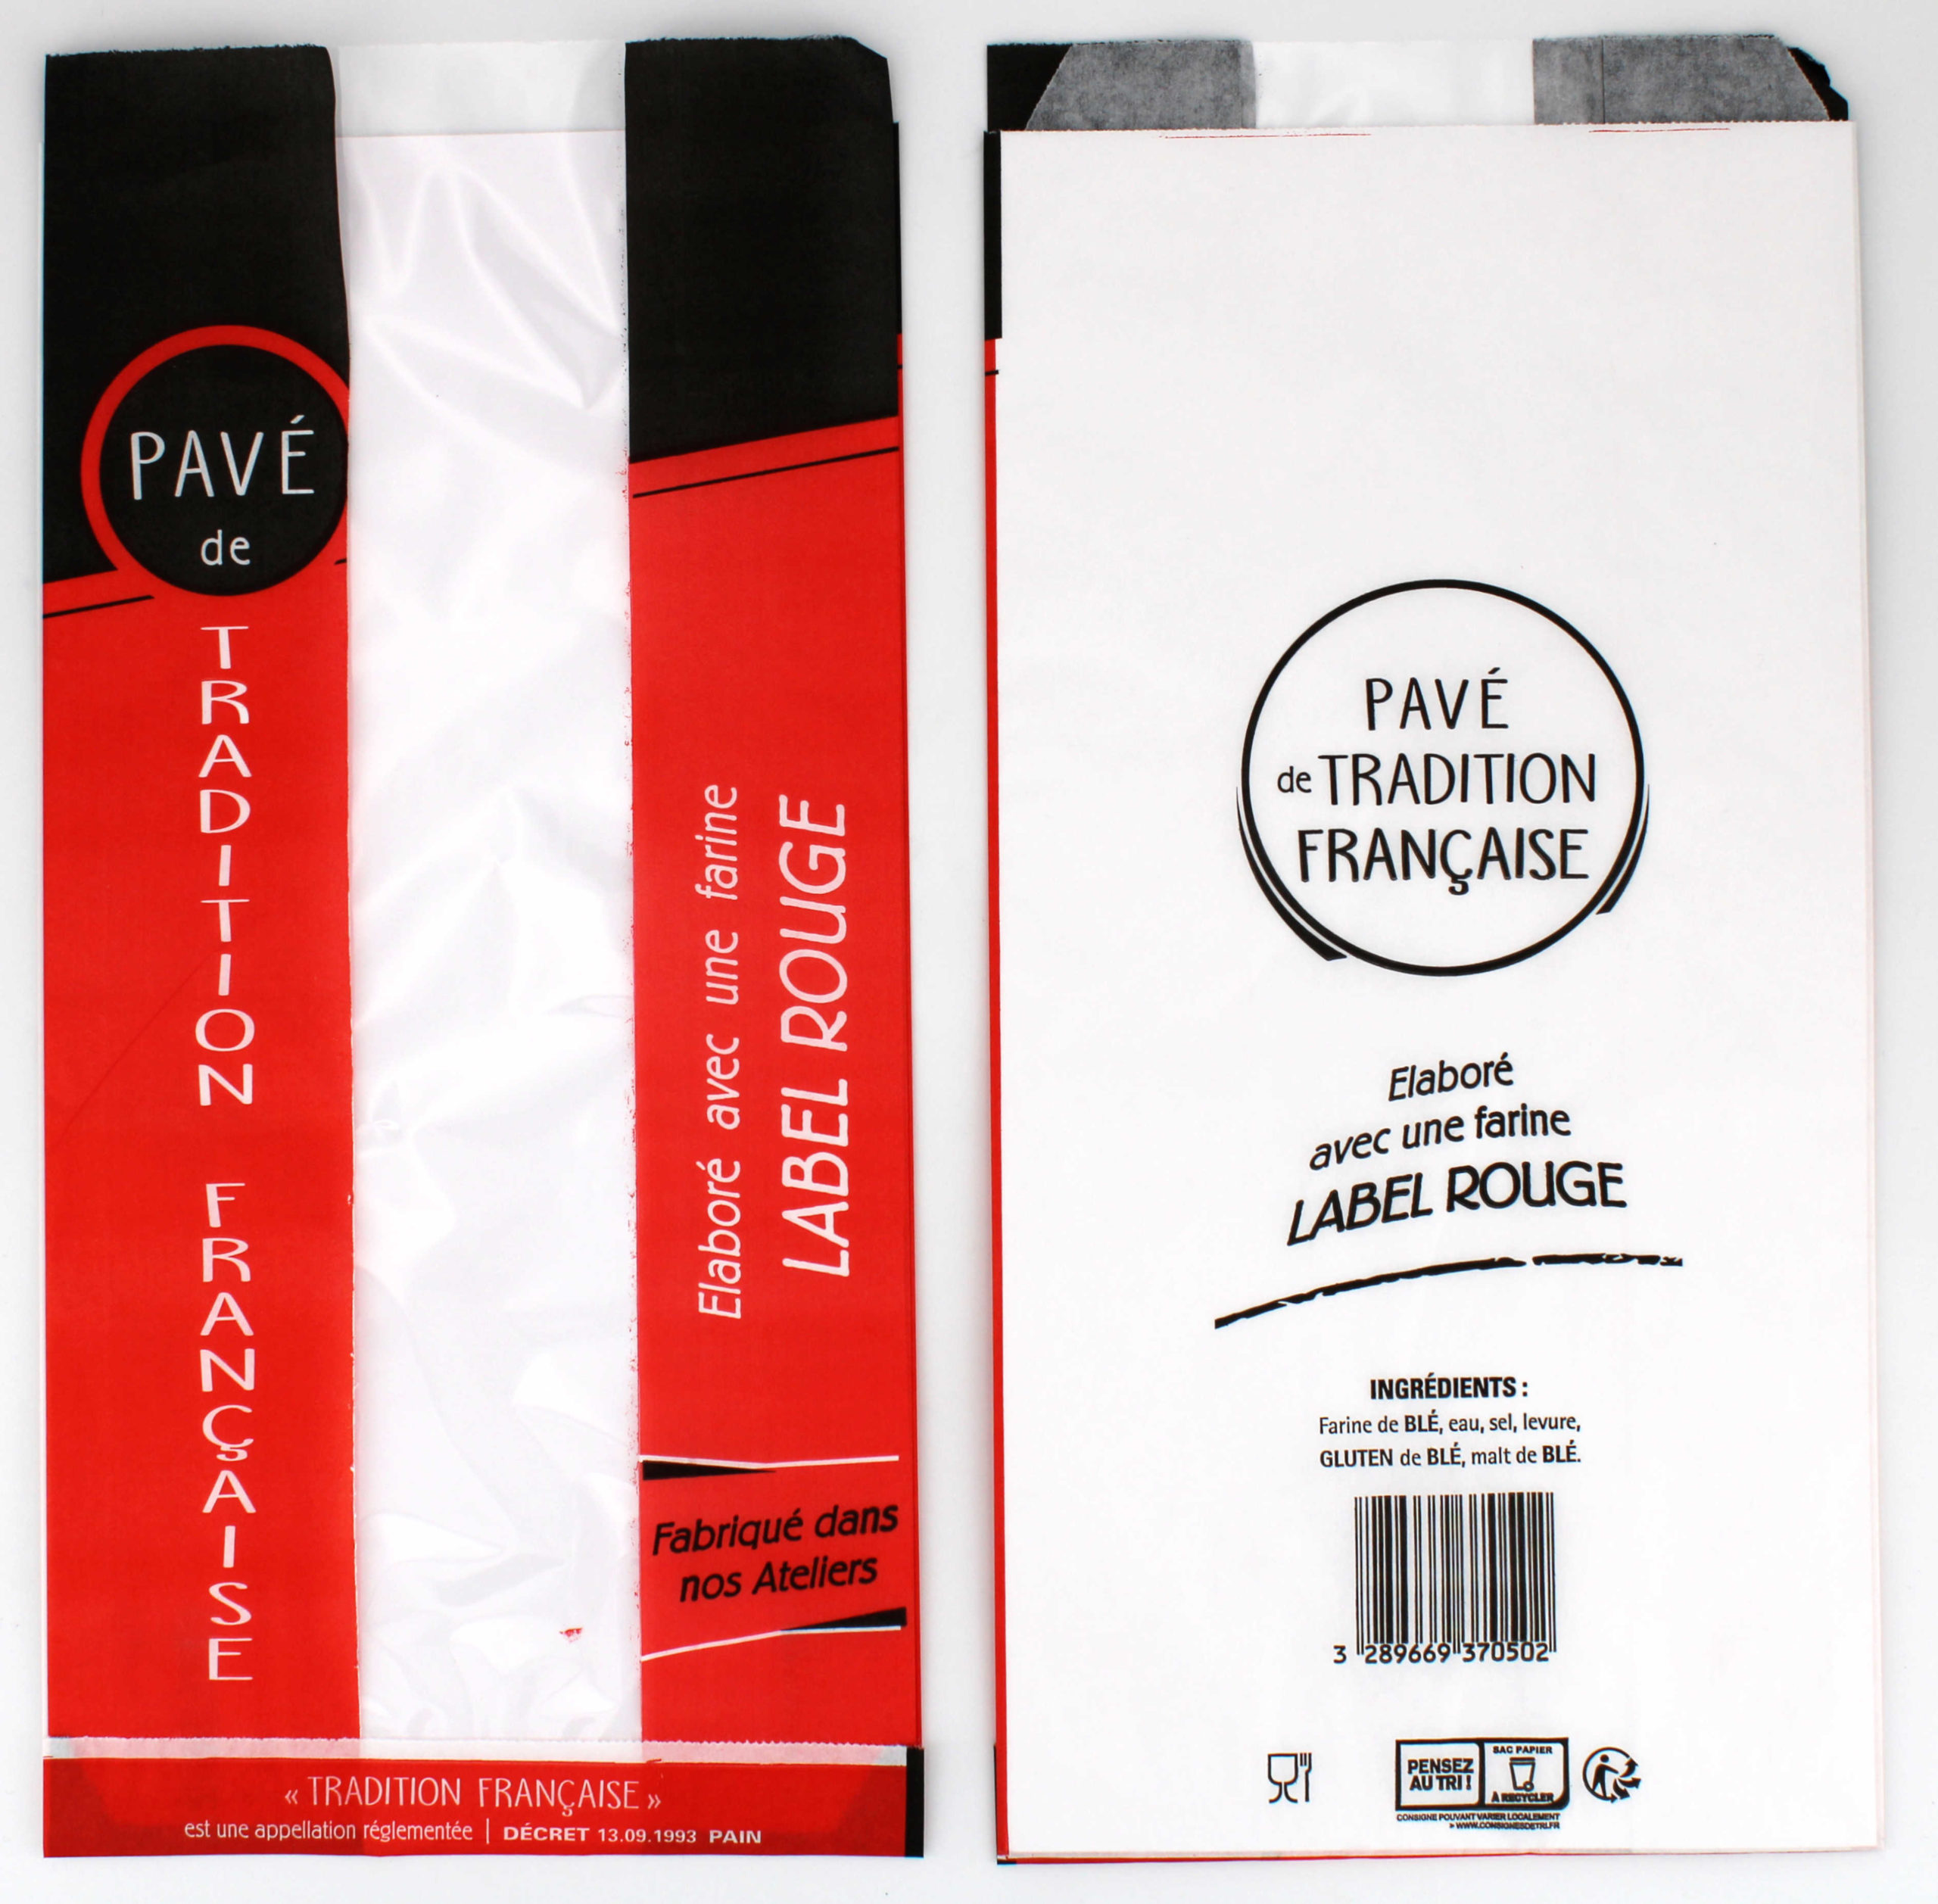 PAVE TRADITION FRANCAISE LABEL ROUGE